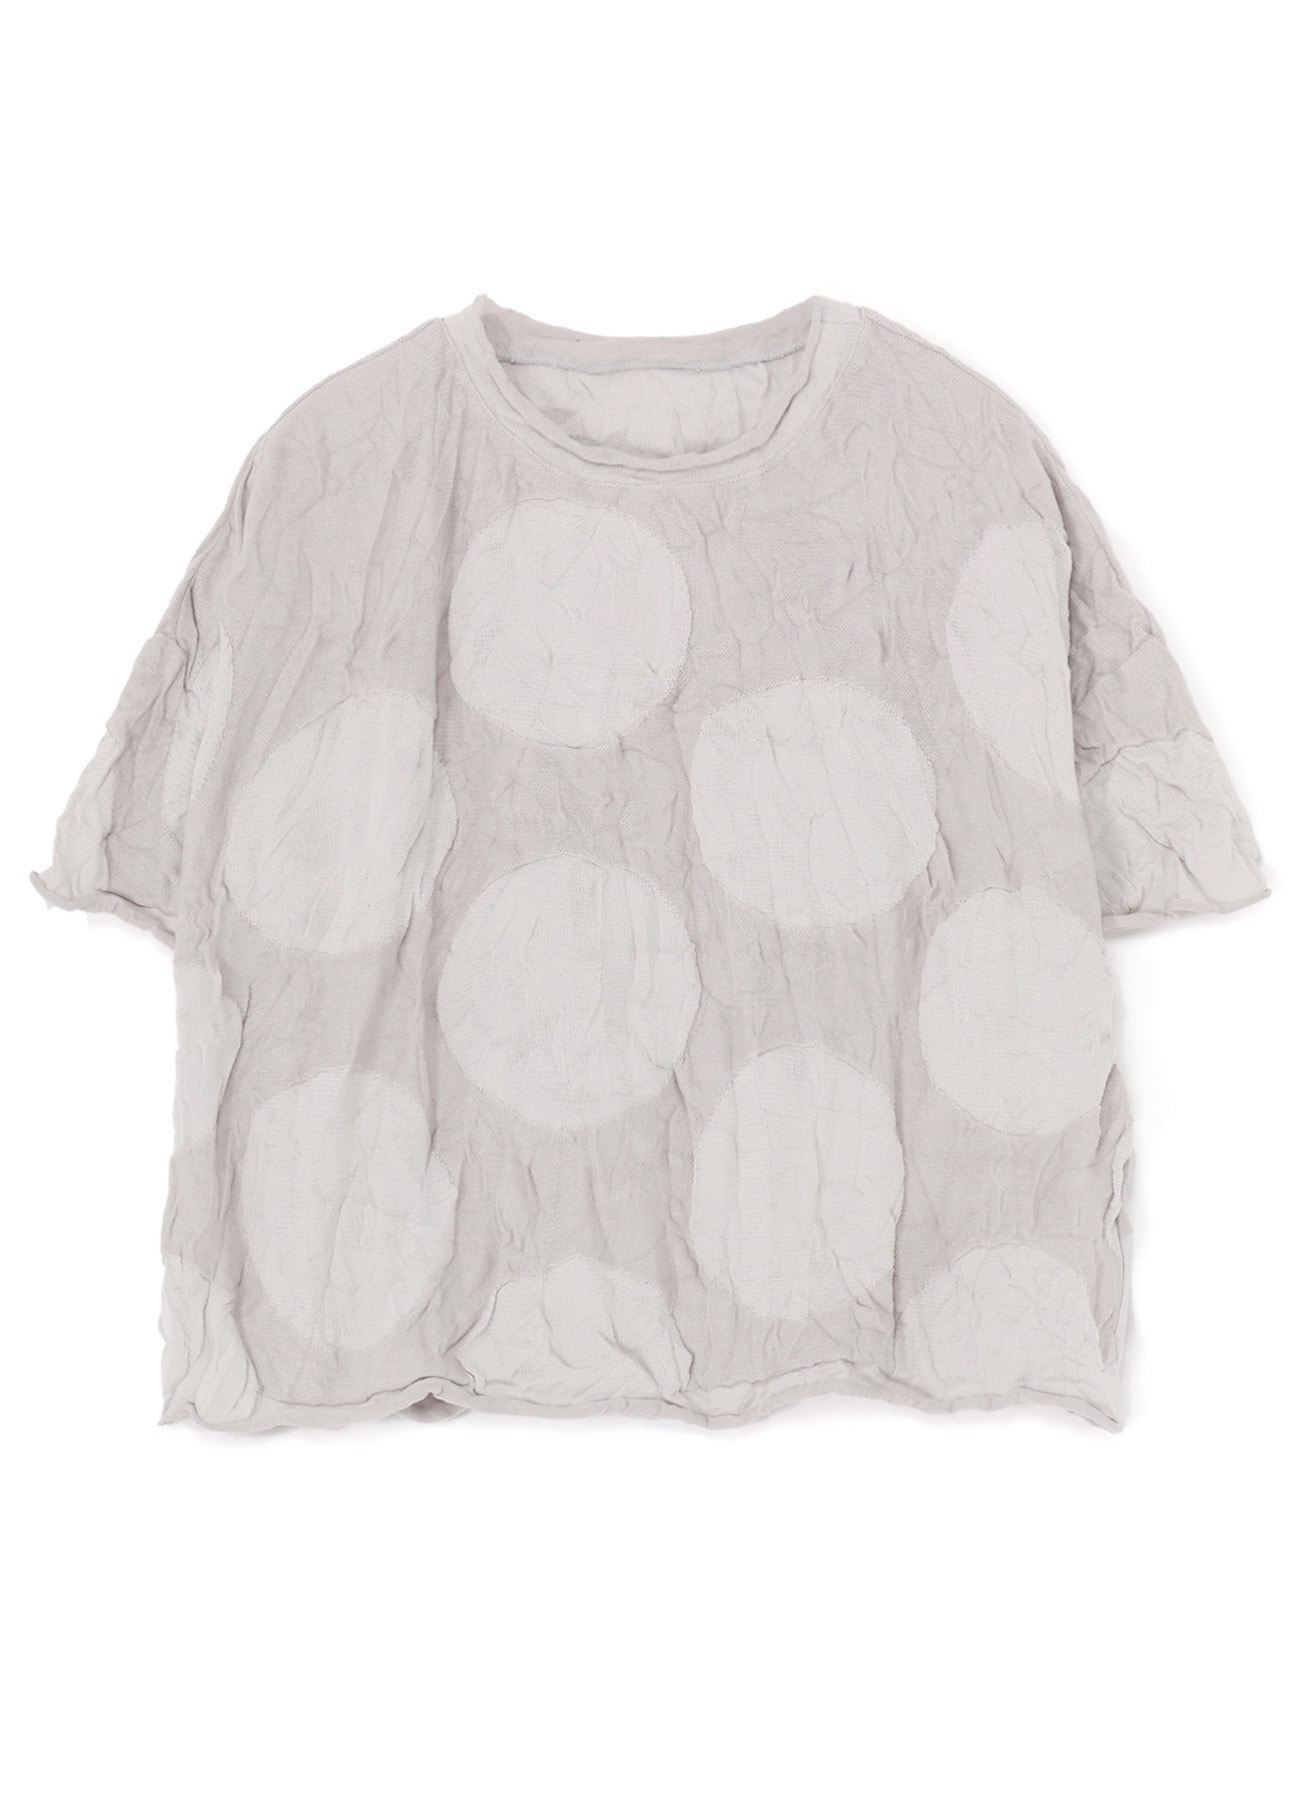 30/2 X 150D BIG POLKA DOT LINKS PULLOVER(S Light Grey): Y's｜THE 